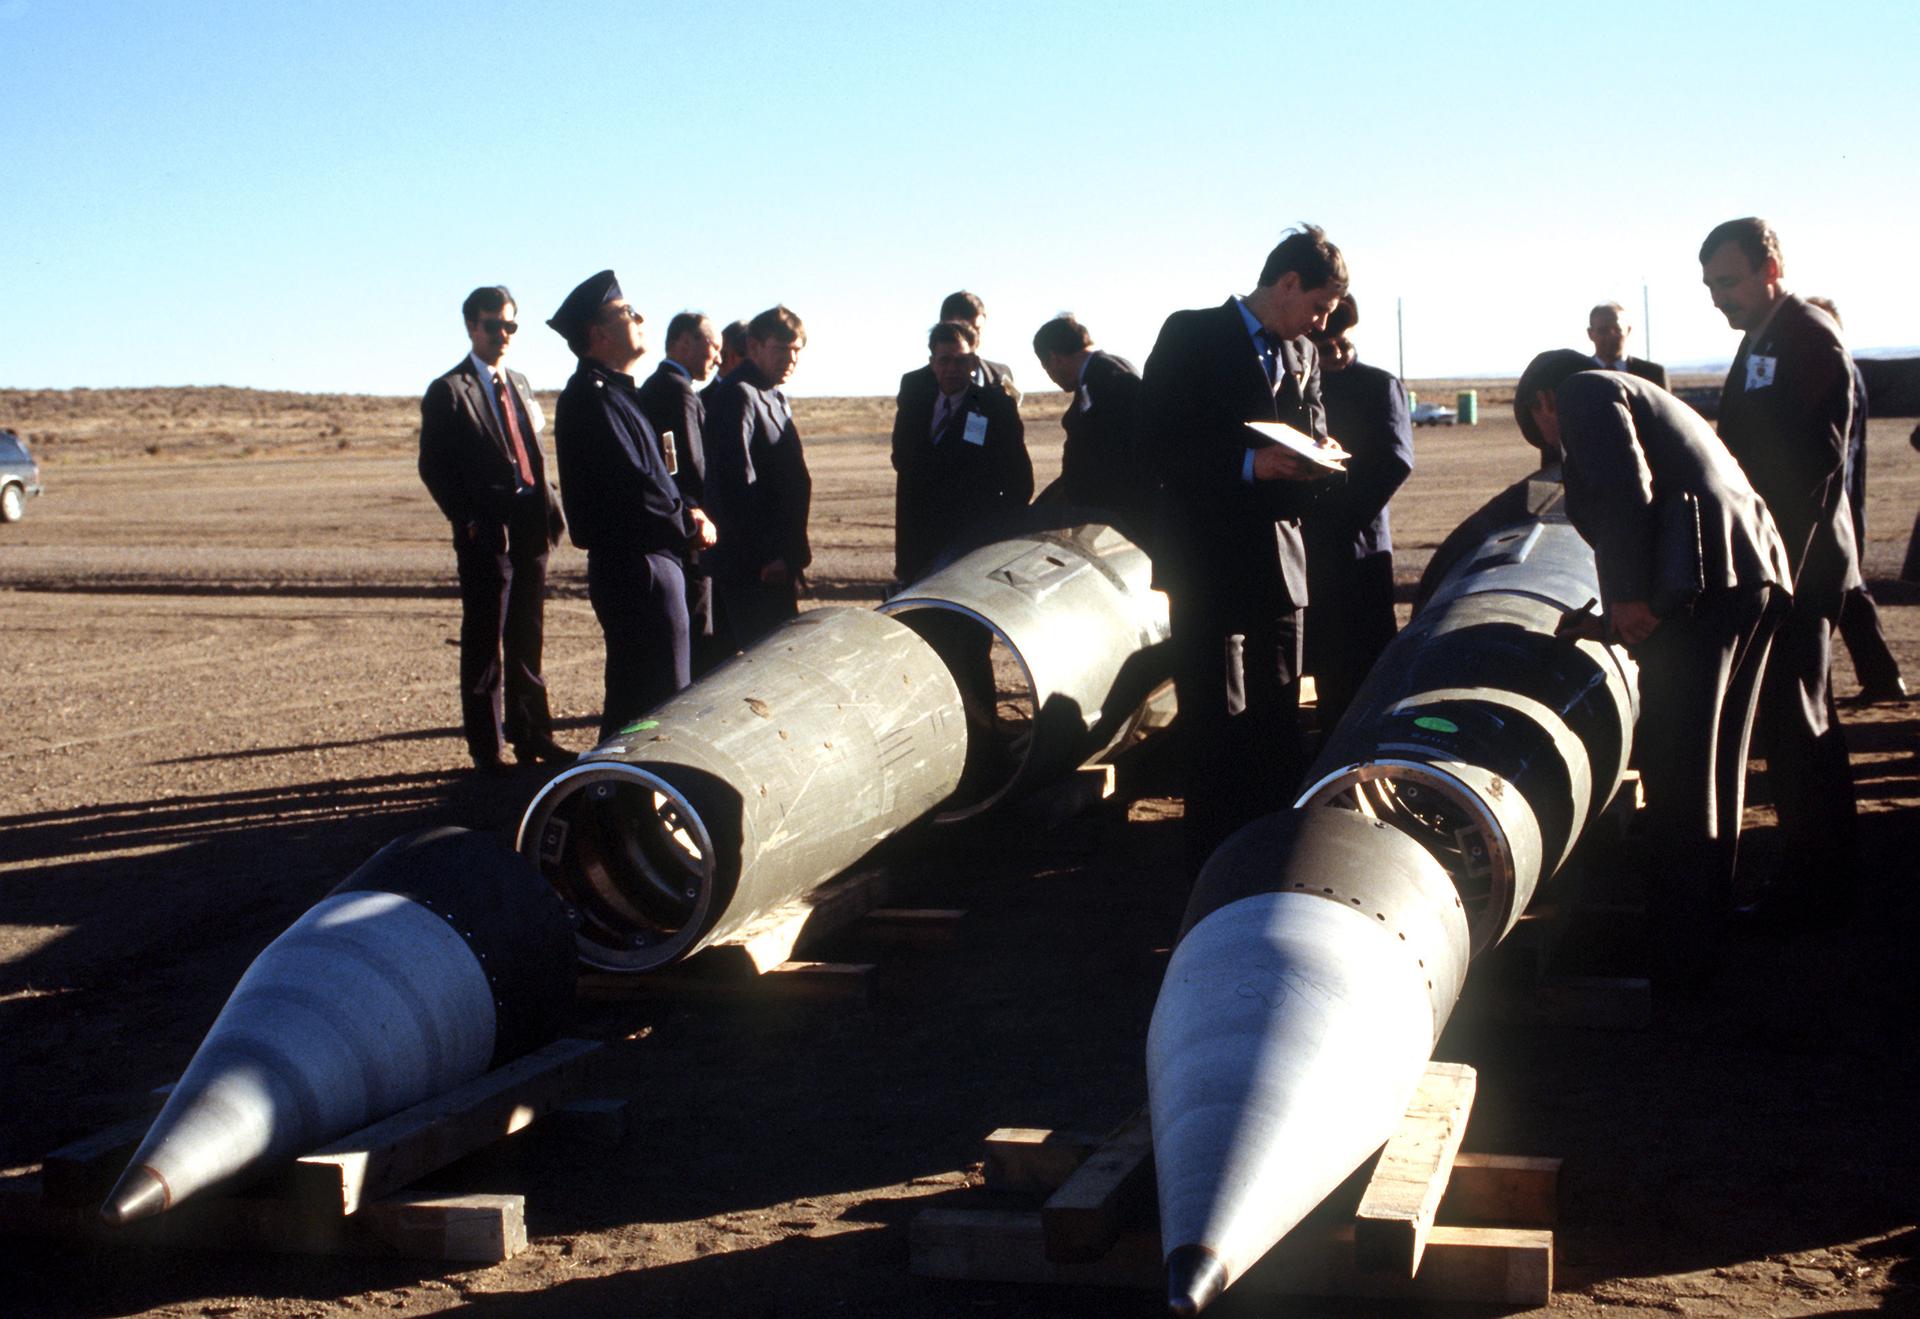 With their American escorts watching, Soviet inspectors examine Pershing II missiles on Jan. 14, 1989, prior to their destruction in accordance with the Intermediate-Range Nuclear Forces Treaty.